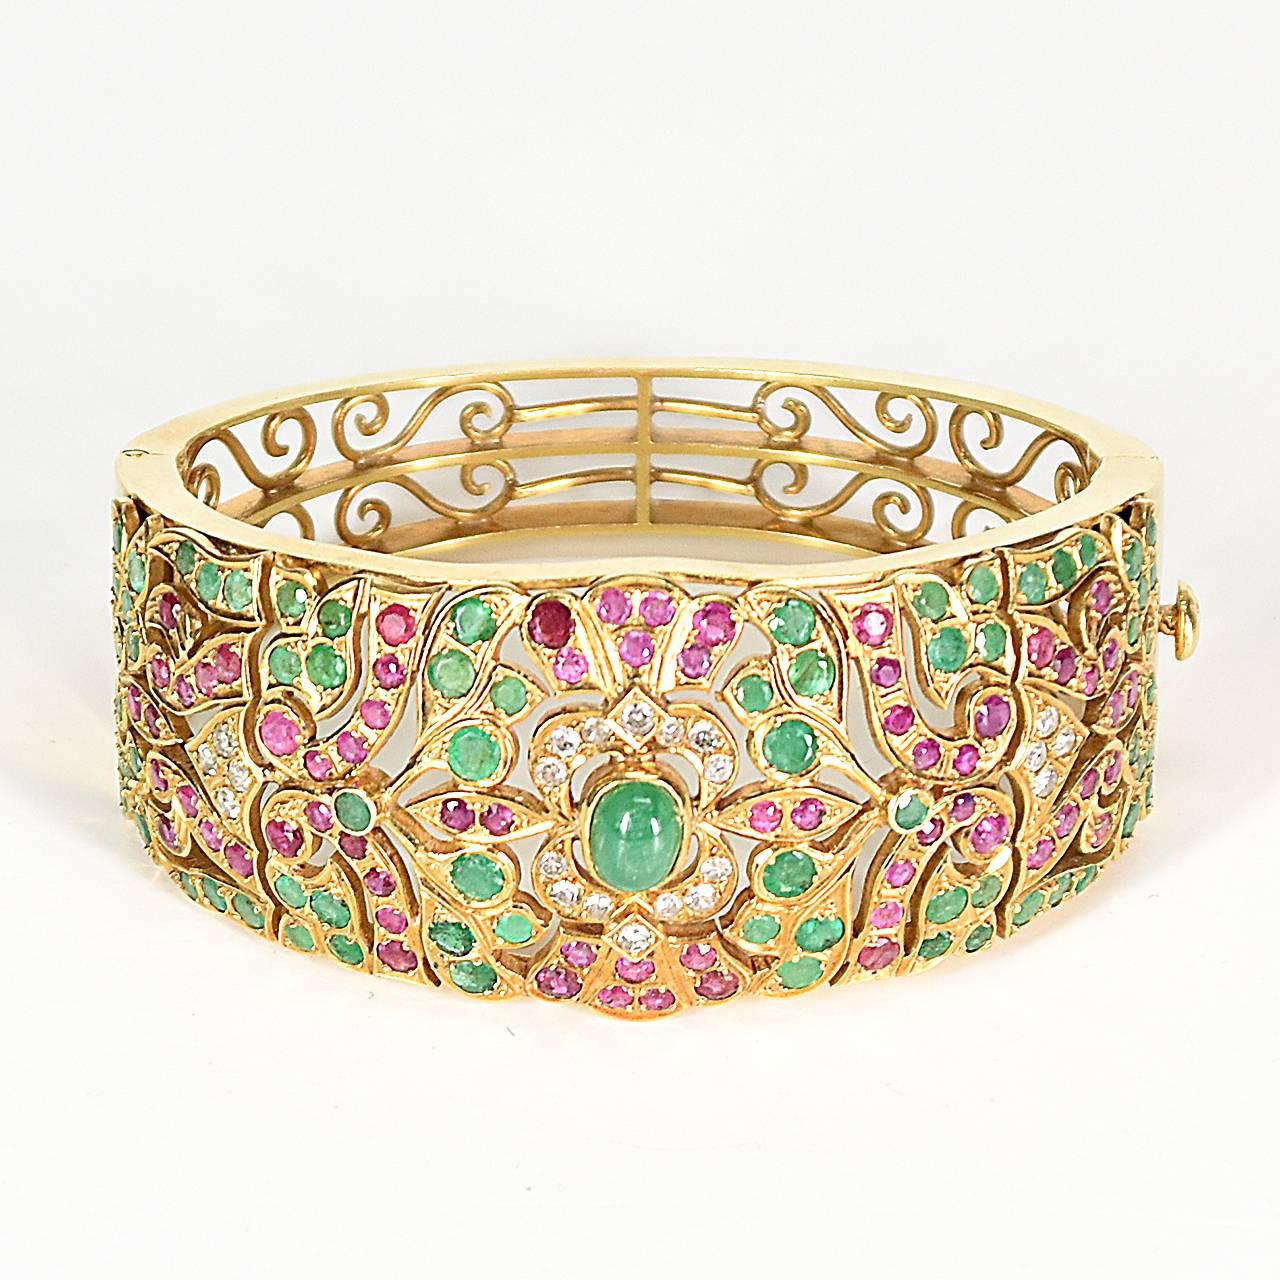 Anglo Indian Detailed18ct Yellow Gold Bangle design studded set with 71 emeralds, 73 rubies & 22 diamonds in an intricately pierced Arabesque style.
Circa 1920's
Independent valuation in Australian dollars
